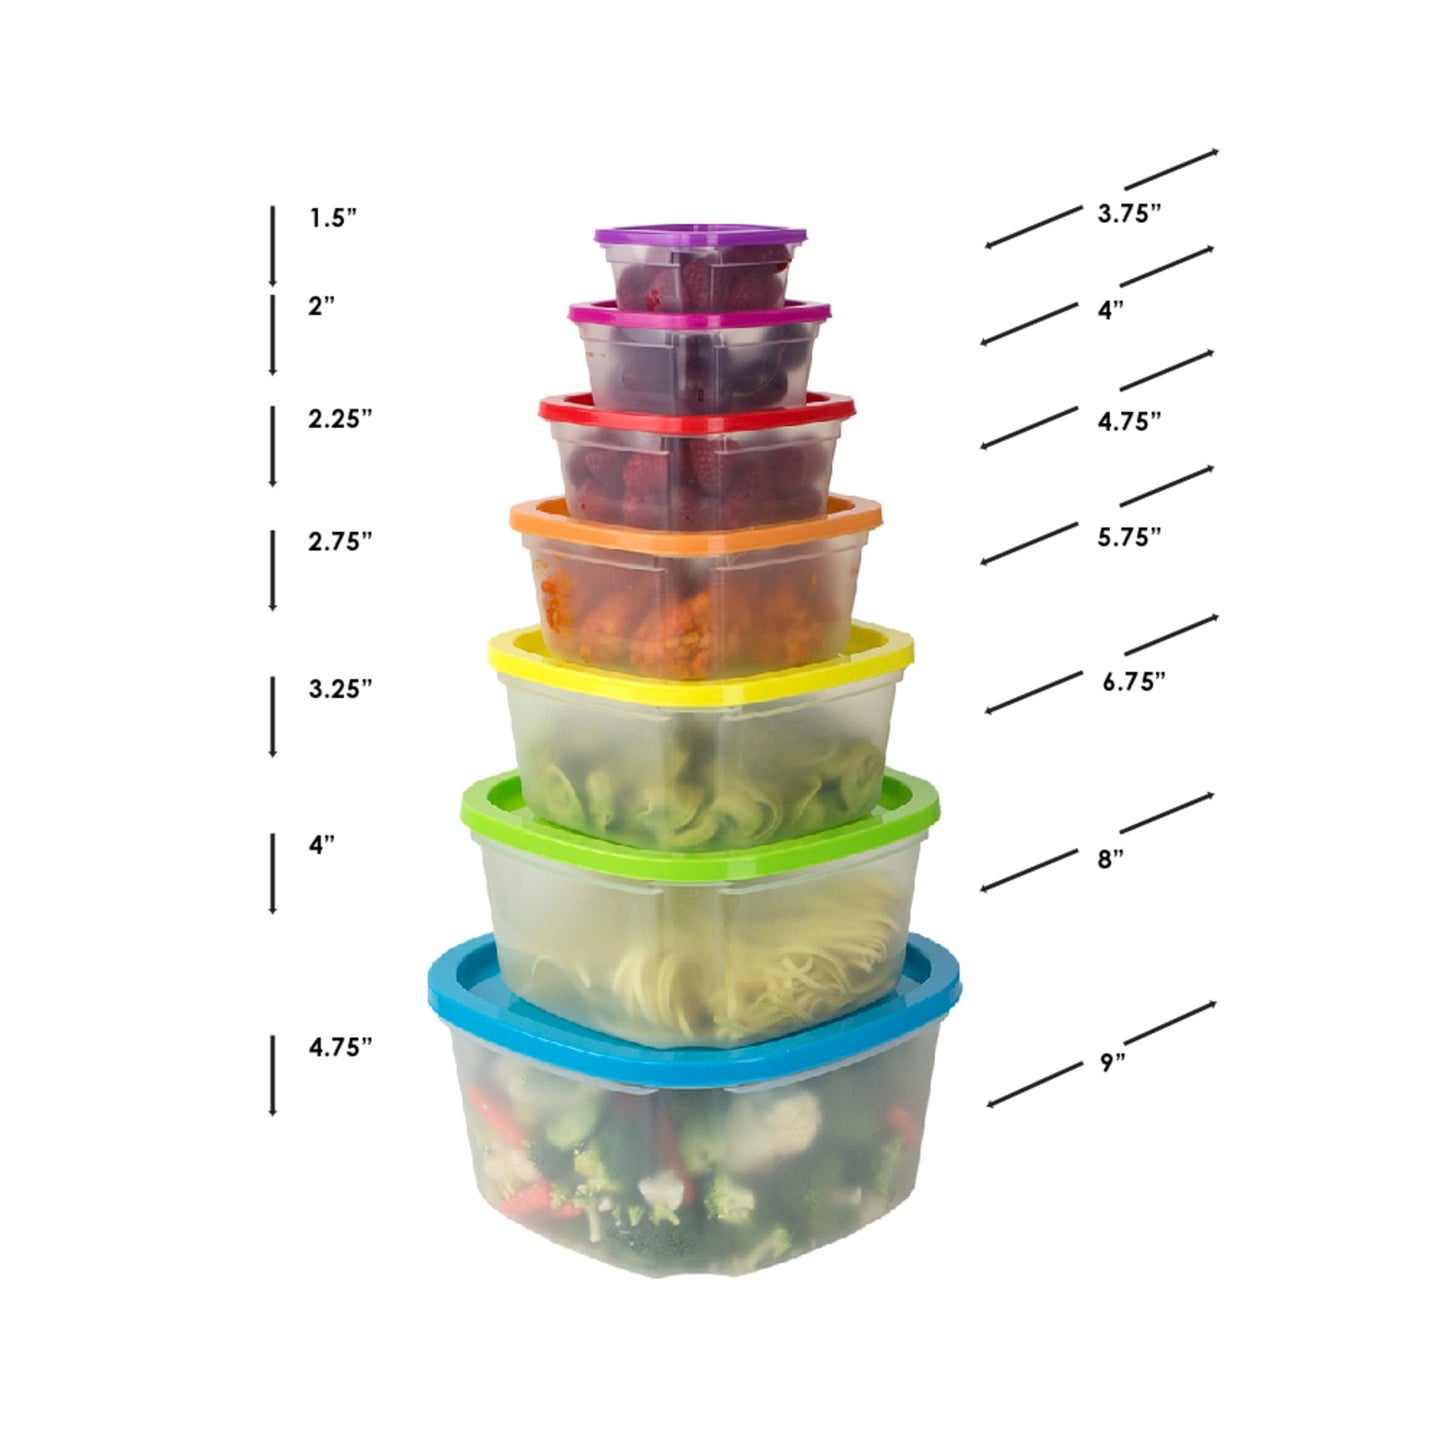 7 Pack Airtight Food Storage Container Set - Kitchen & Pantry